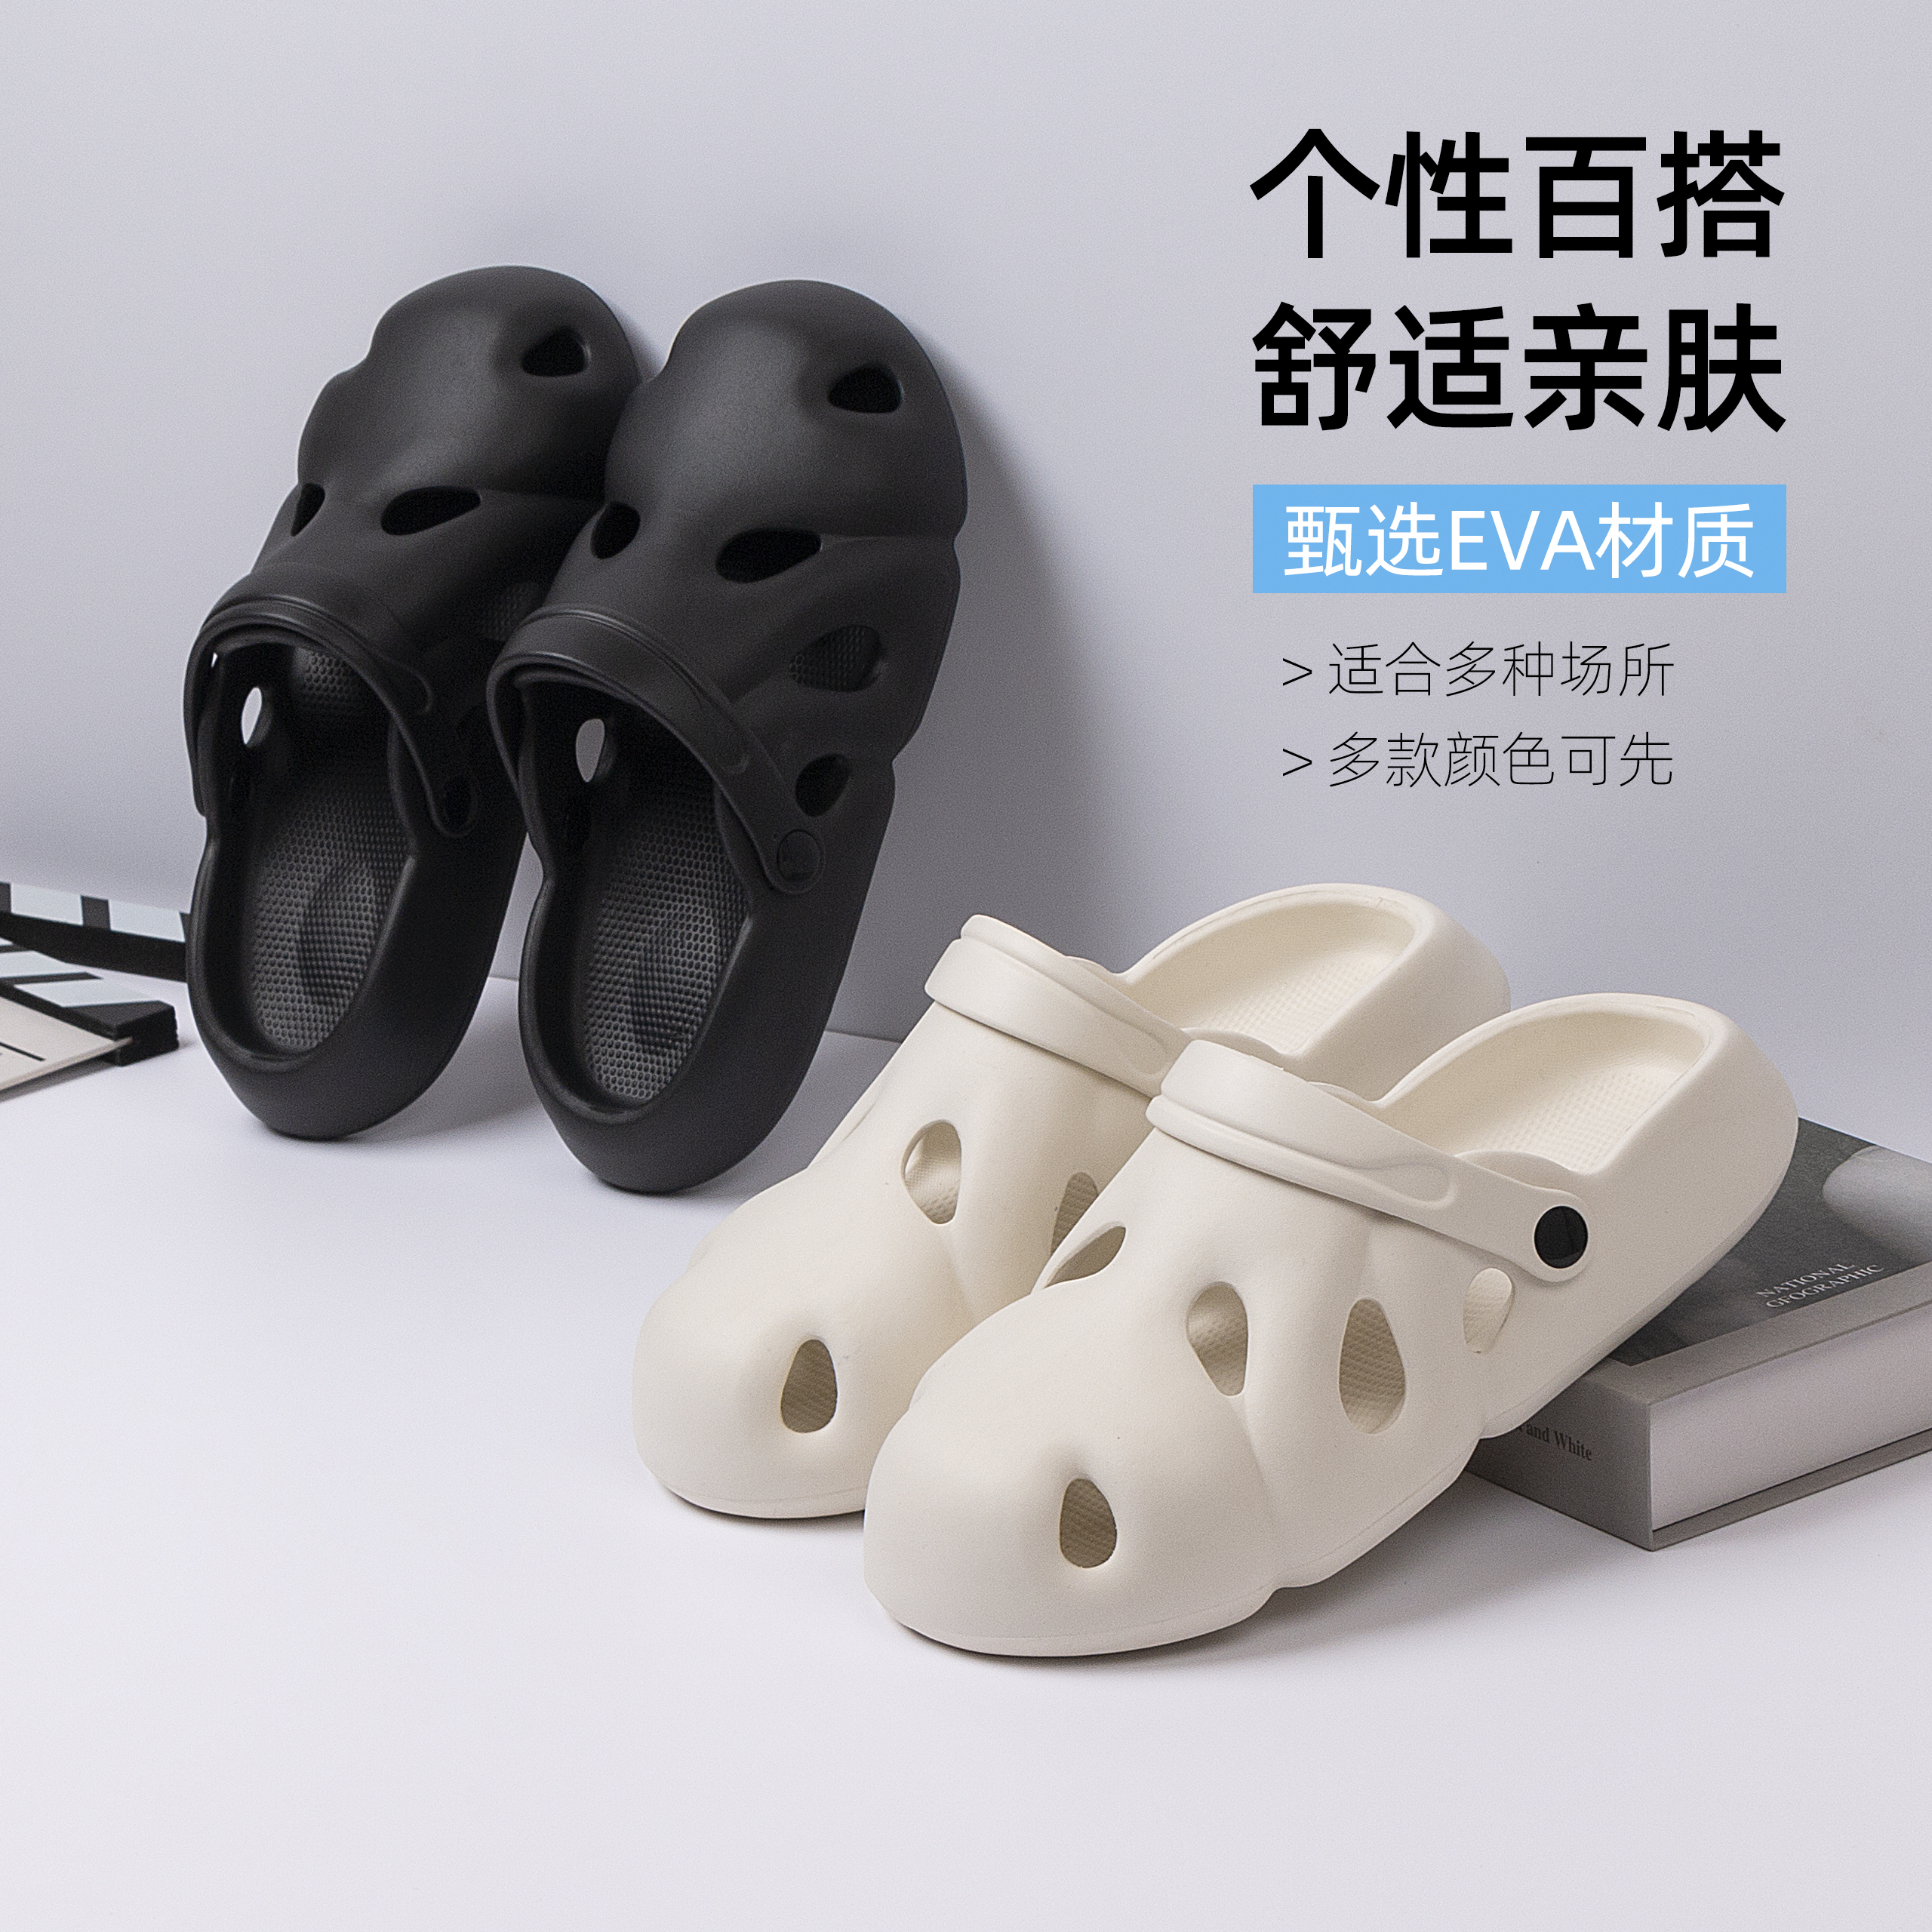 Comfortable, Soft and Stylish Garden Shoes for Man  QL2208 Featured Image